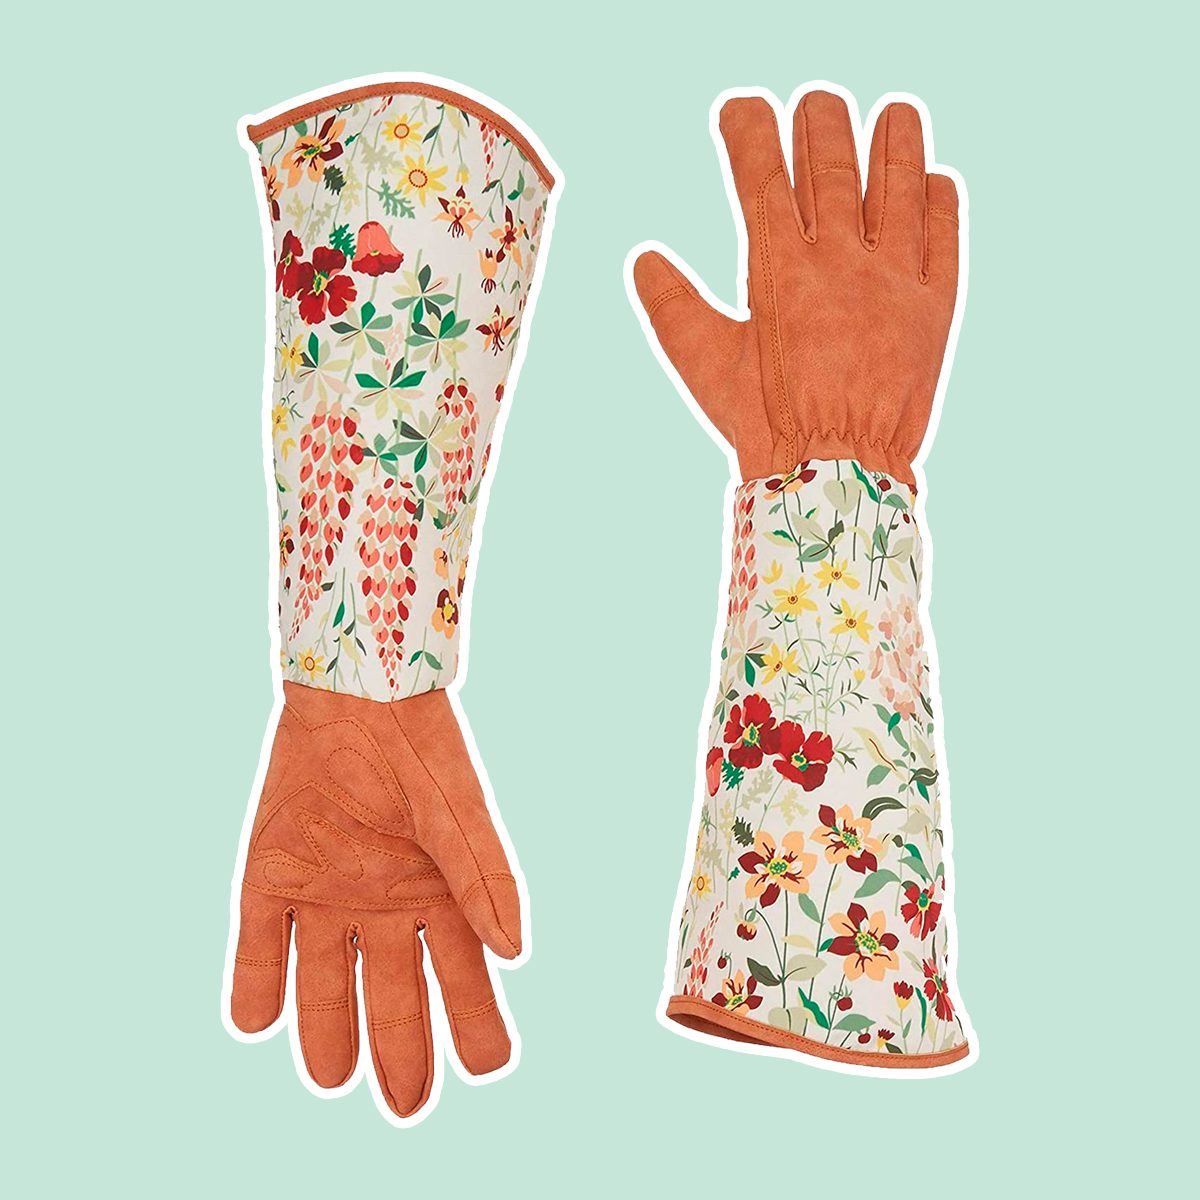 Ruibo Leather Rose Gardening Gloves/Thorn Proof Pruning Gloves With Puncture Resistant Long Sleeve Polyester Print Cuff/For Blackberry Plants Rose Bush Women